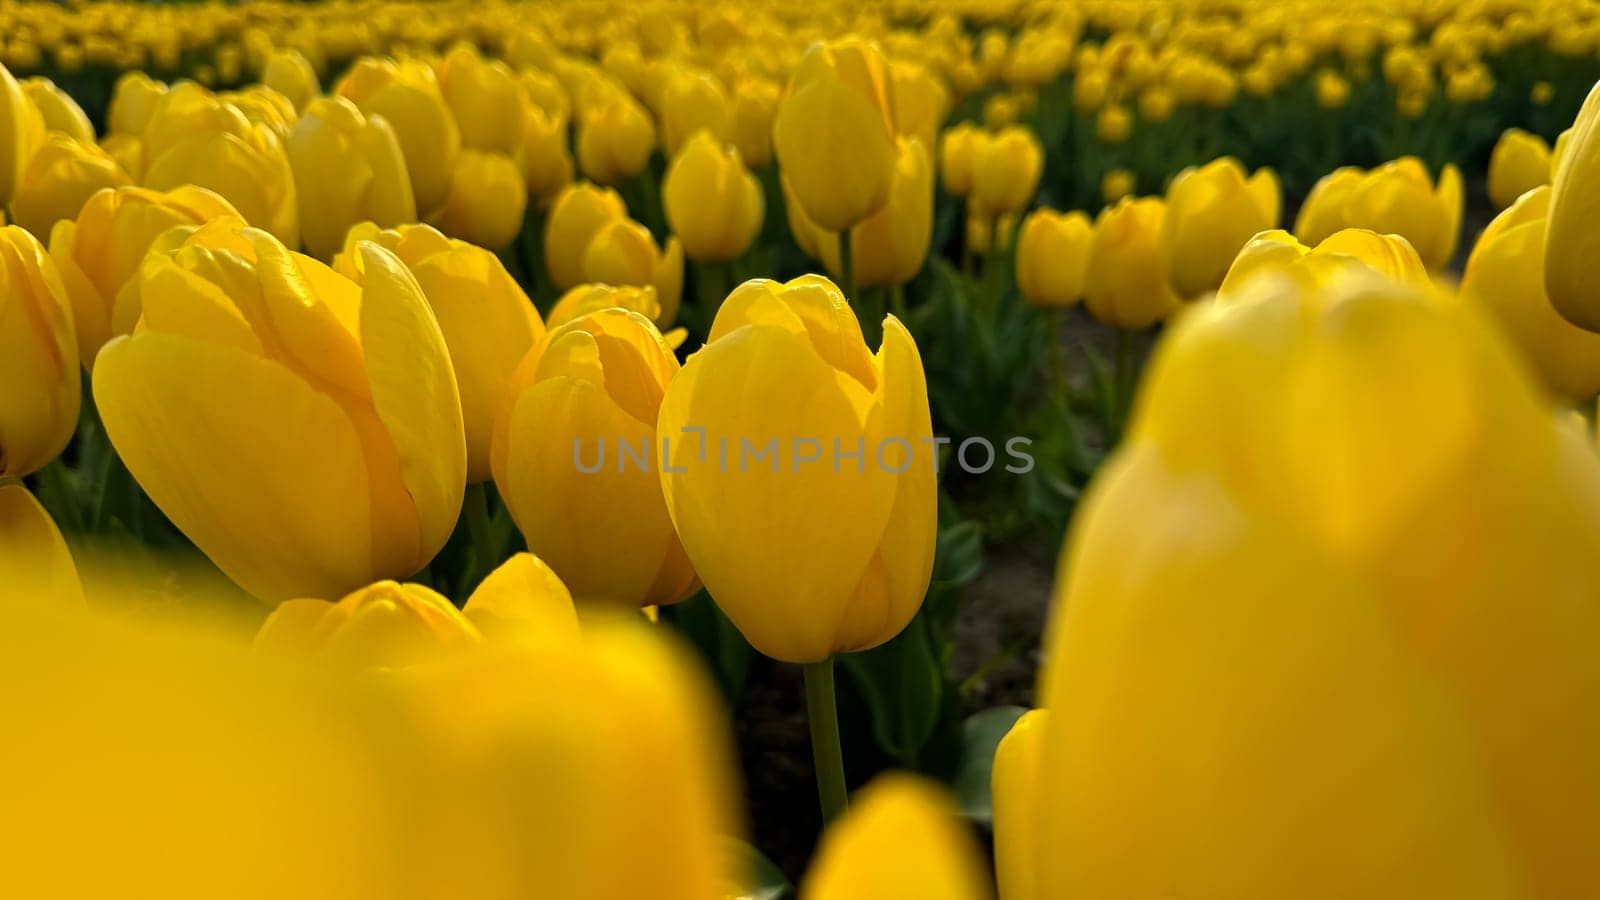 Flowers background. Bright yellow tulips blooming in springtime, close up of floral beauty with sunlight highlighting petals, for gardening and Easter concepts, design for postcards. High quality